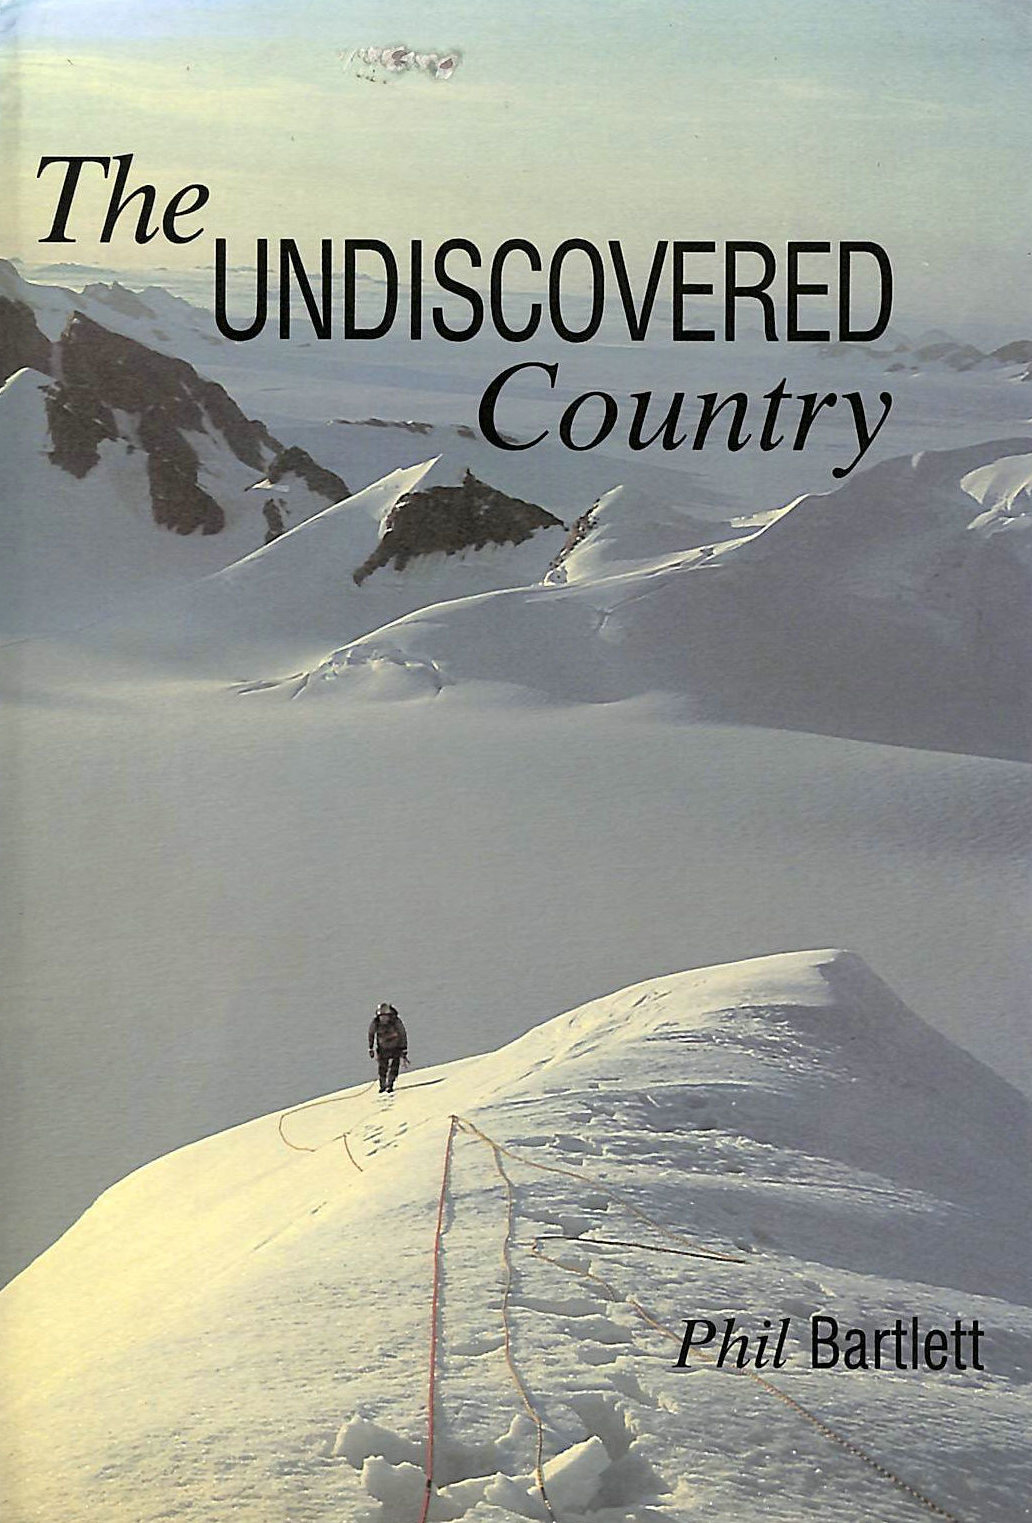 BARTLETT, PHIL - The Undiscovered Country